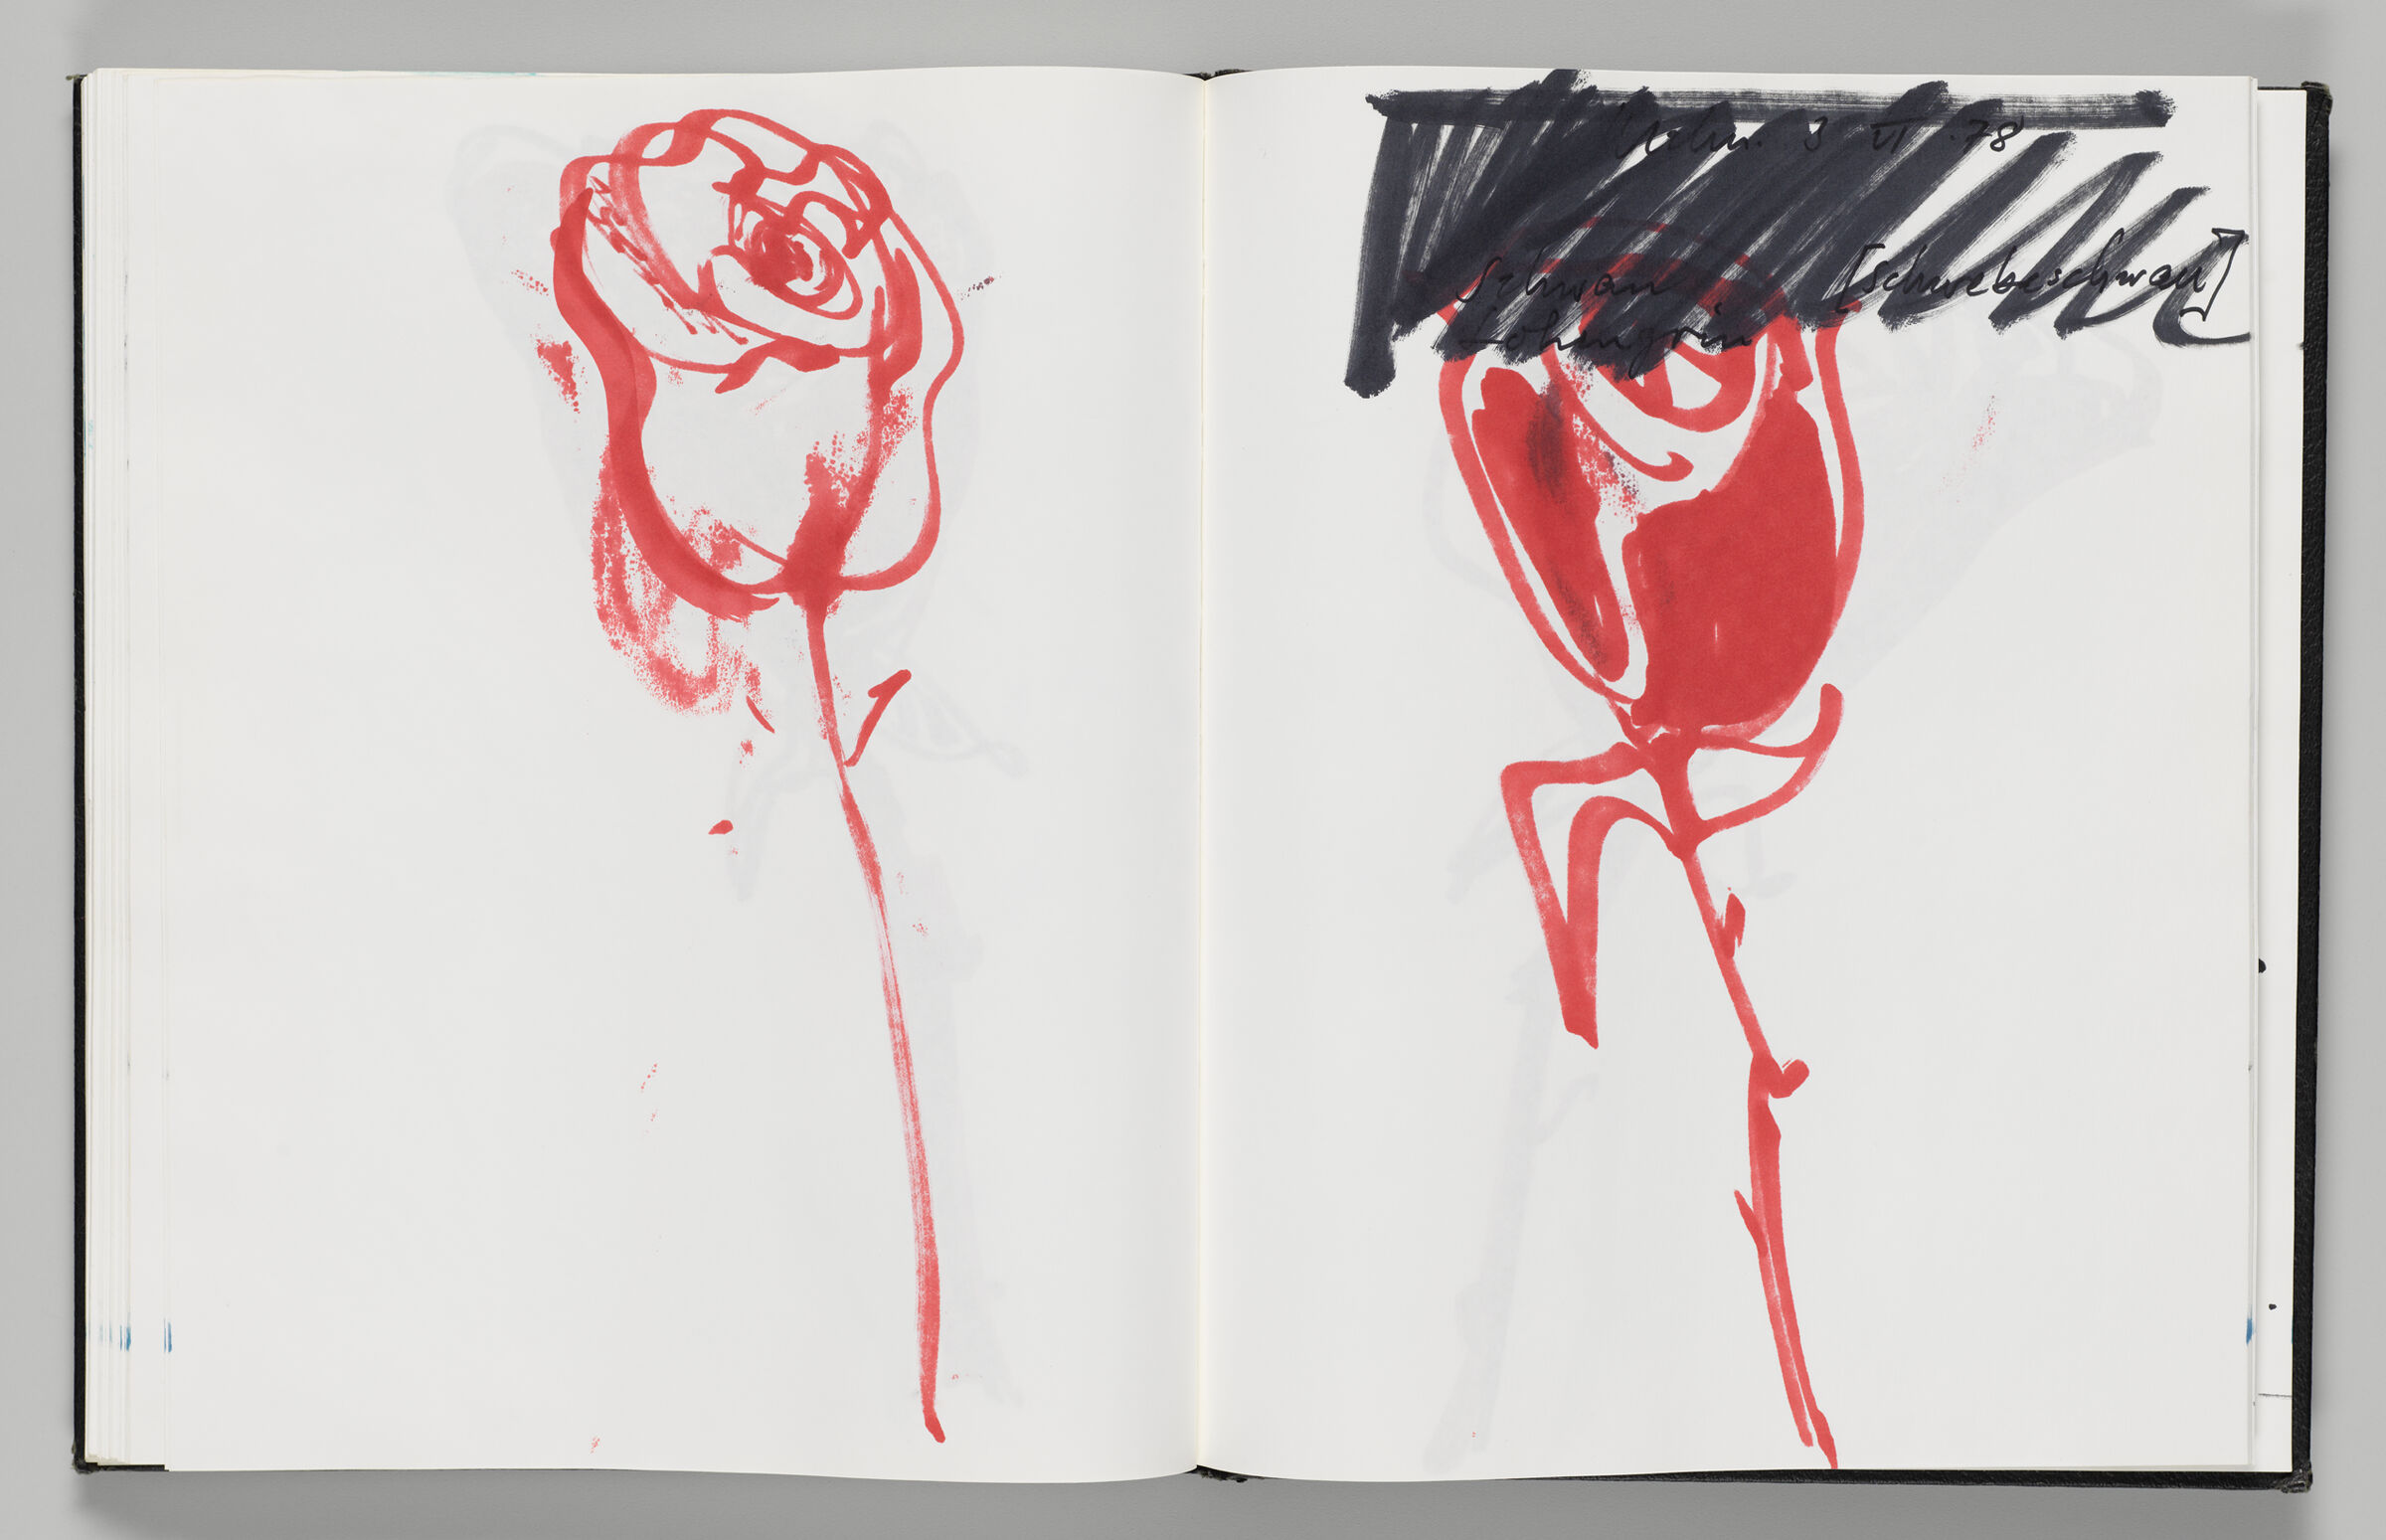 Untitled (Bleed-Through Of Previous Page And Red Rose With Color Transfer, Left Page); Untitled (Notes And Red Rose, Right Page)